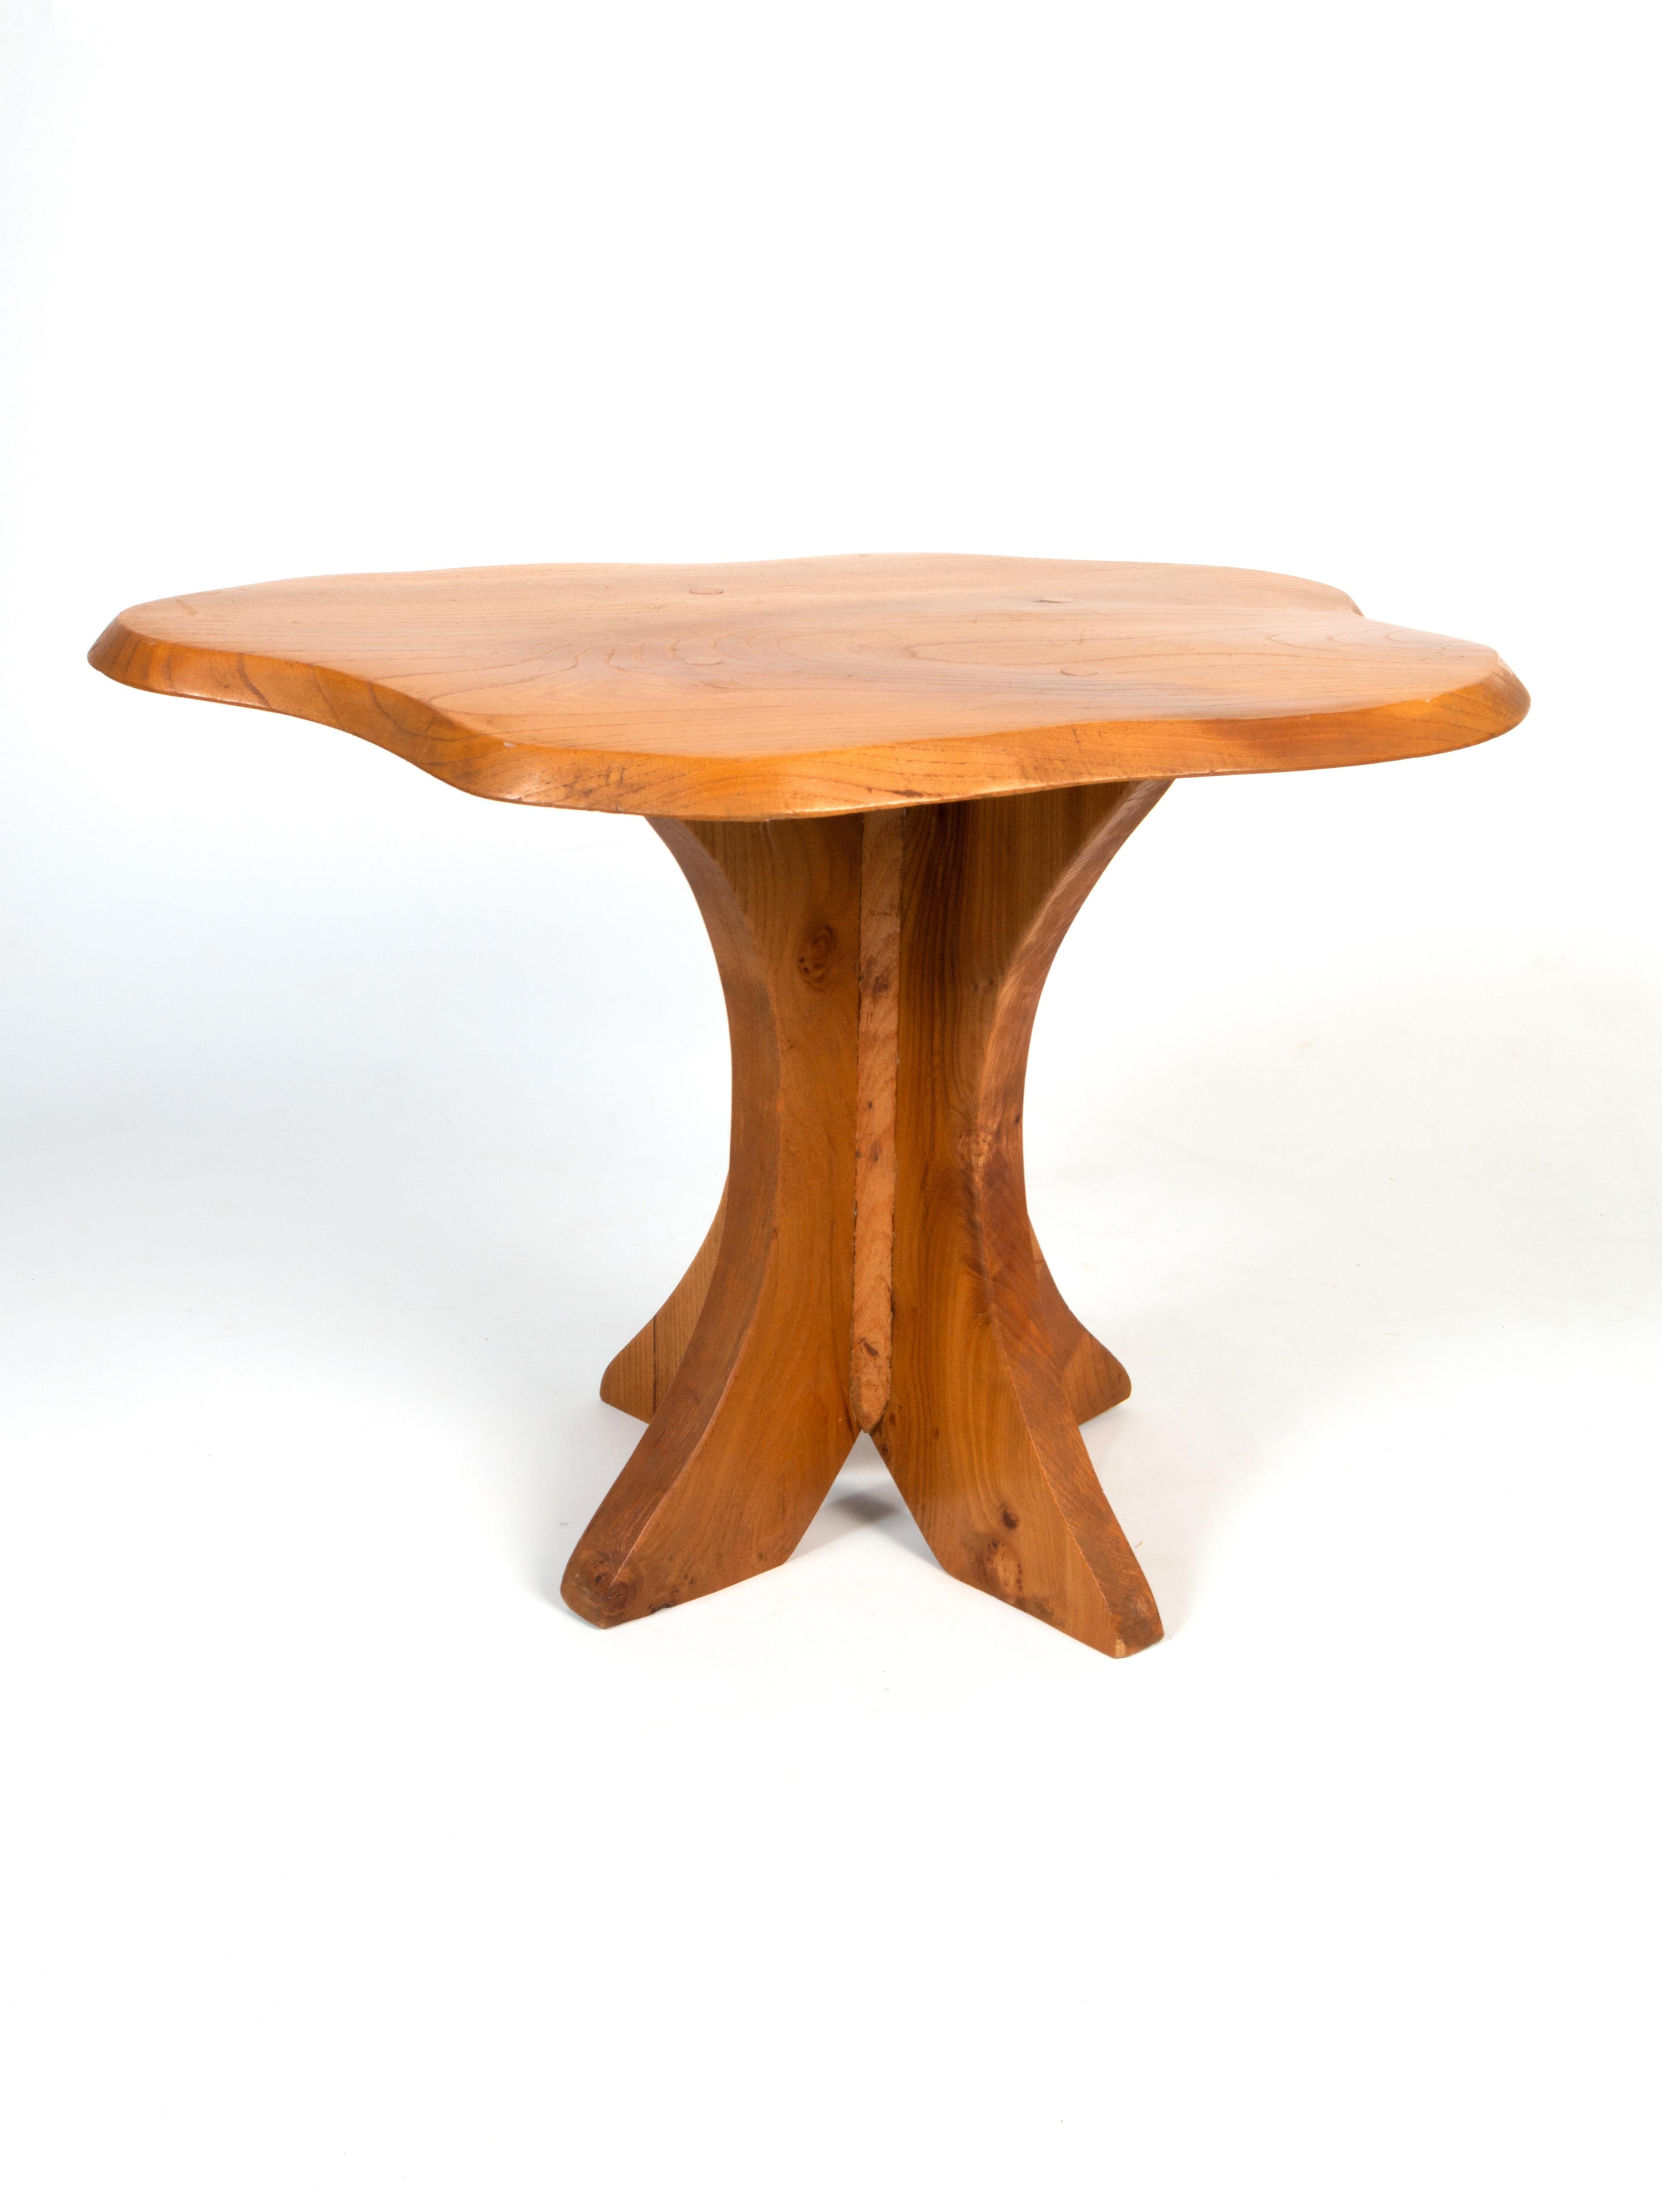 20th Century Midcentury Brutalist Yew Wood Sculptural Side Table England, circa 1970 For Sale